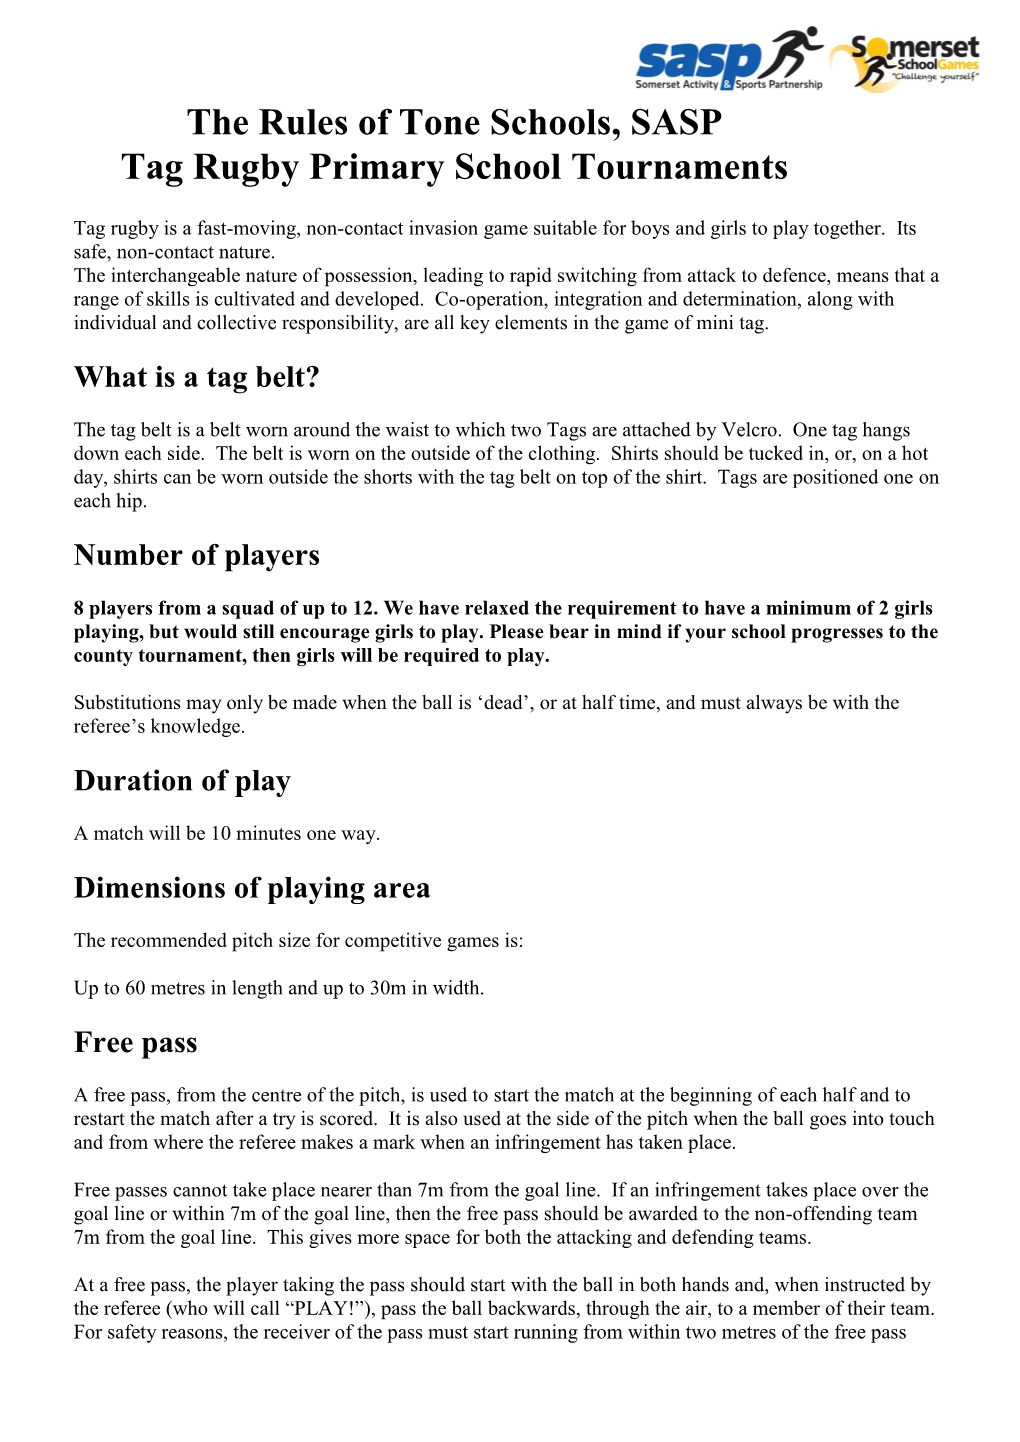 The Rules of Tag Rugby (Year 6 SYG Version)